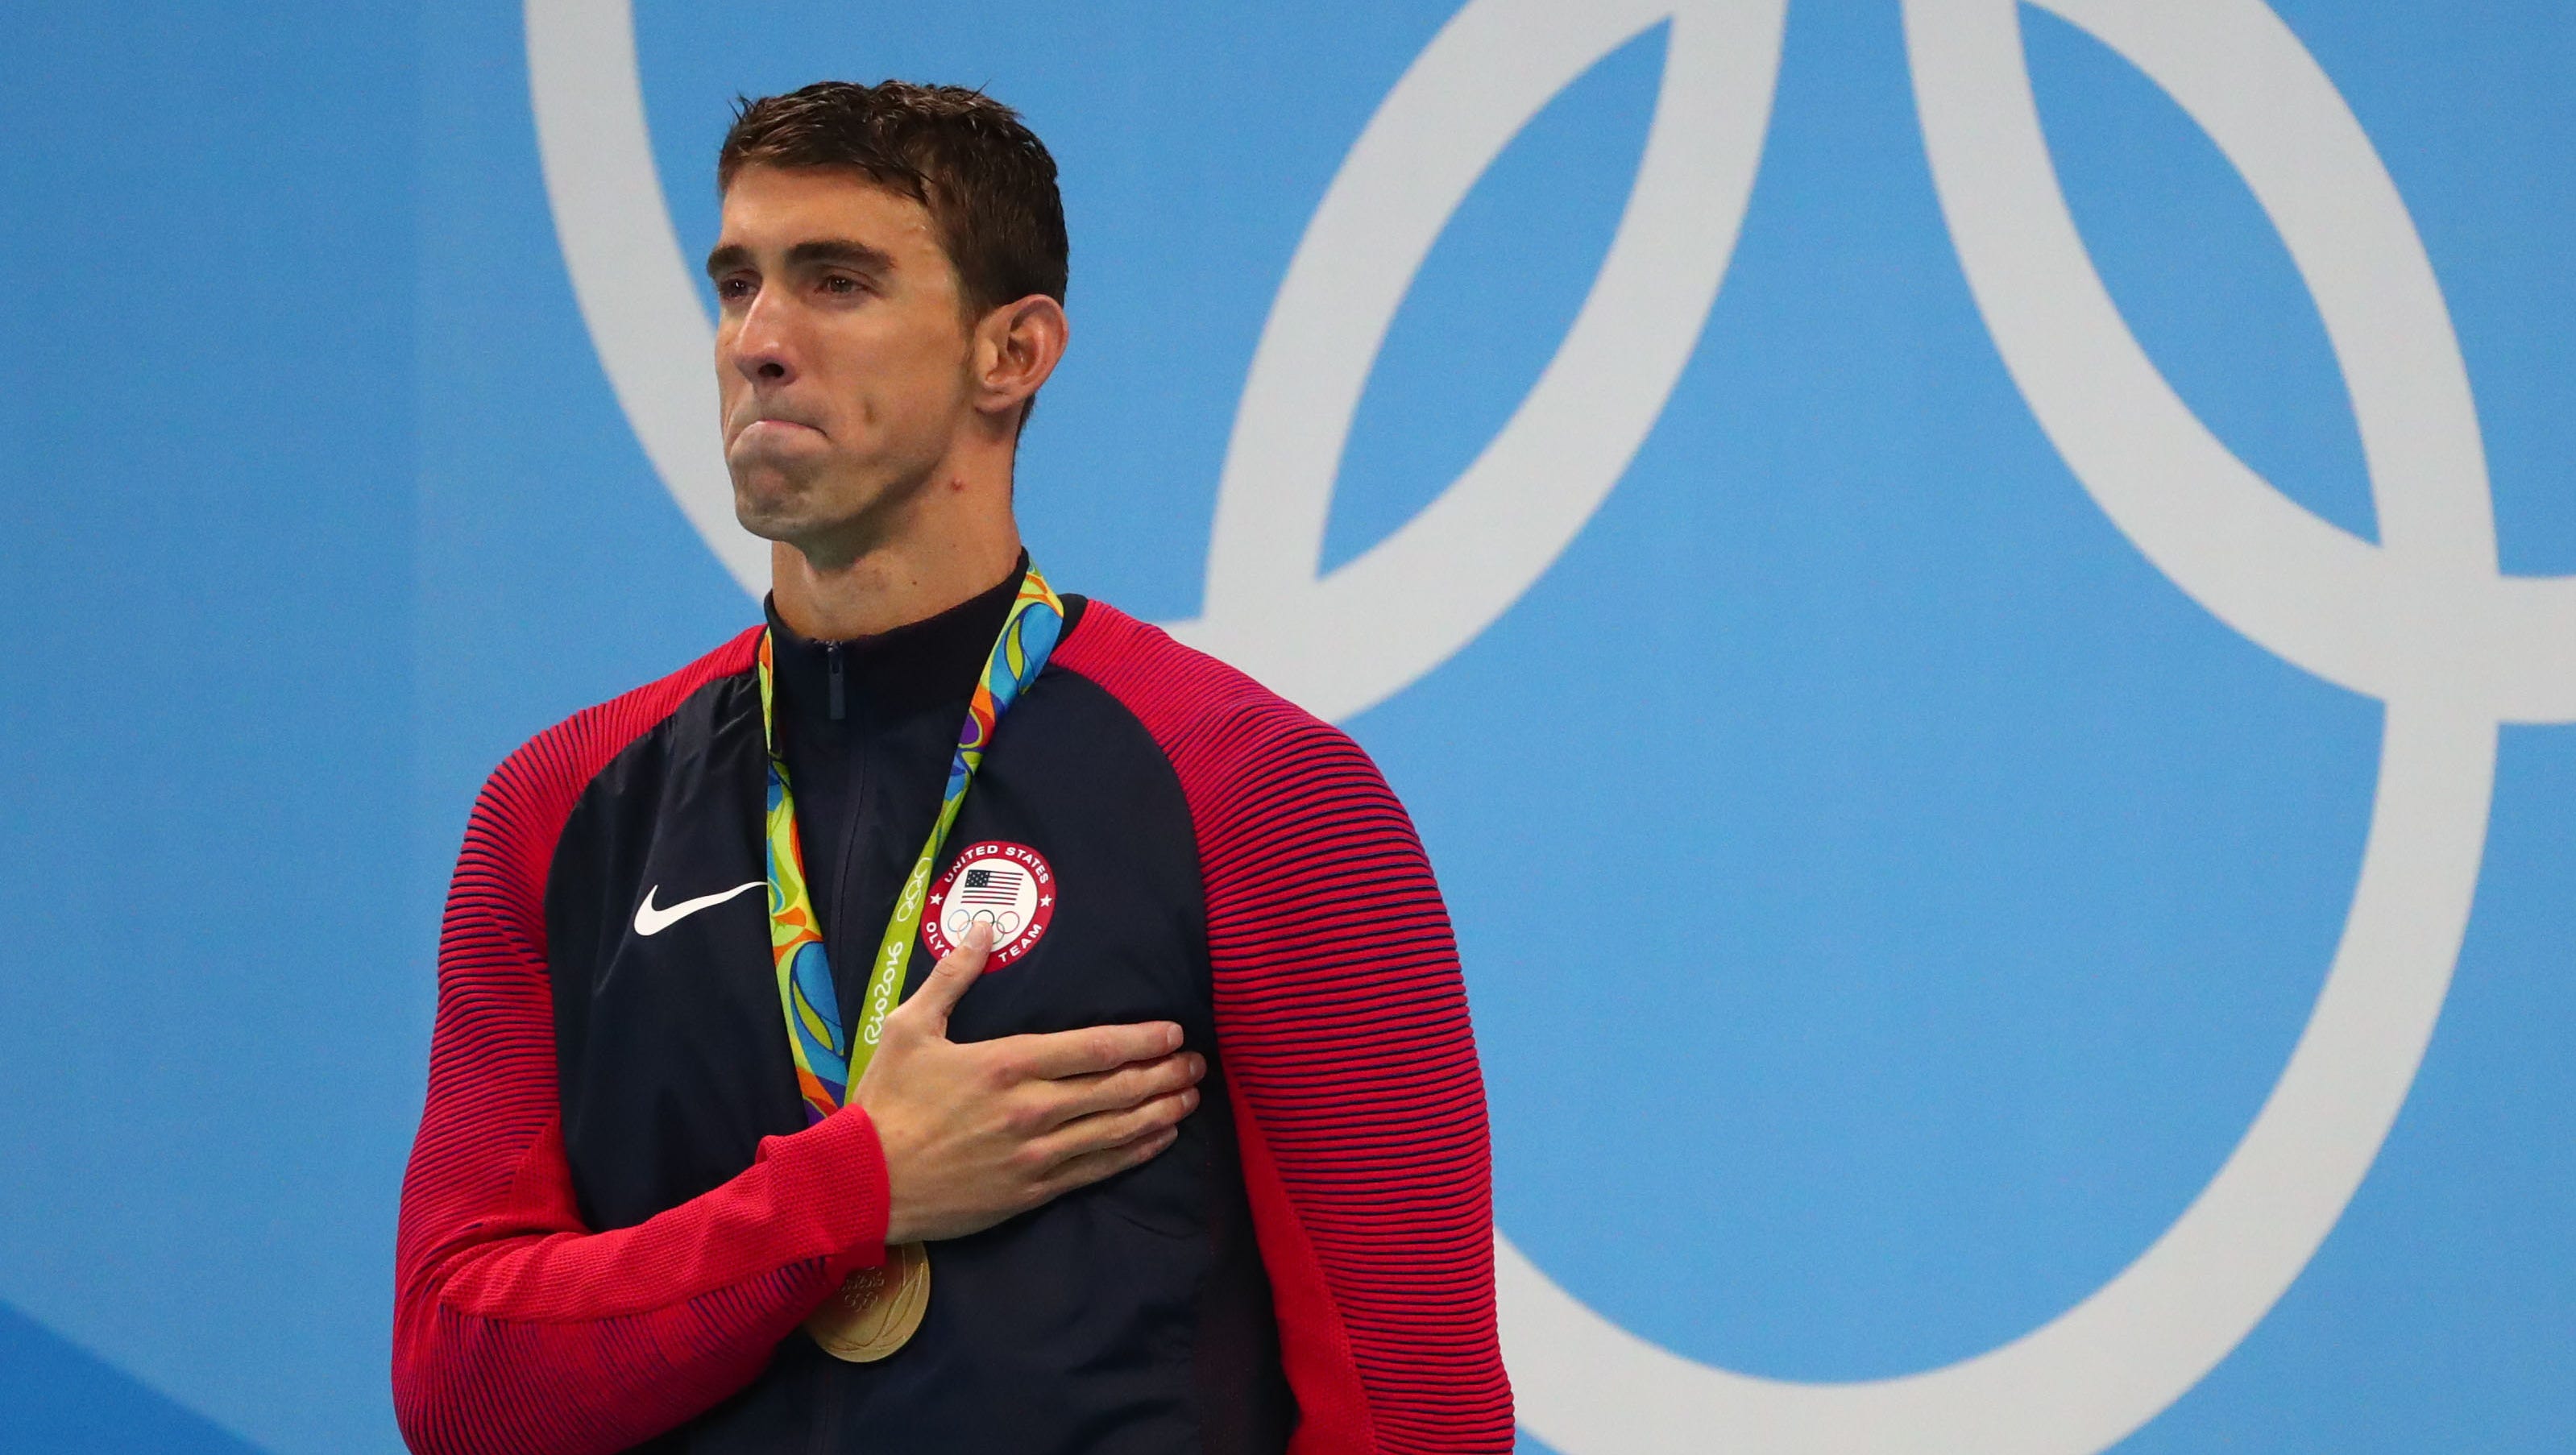 Full list of every Olympic medal Michael Phelps has won